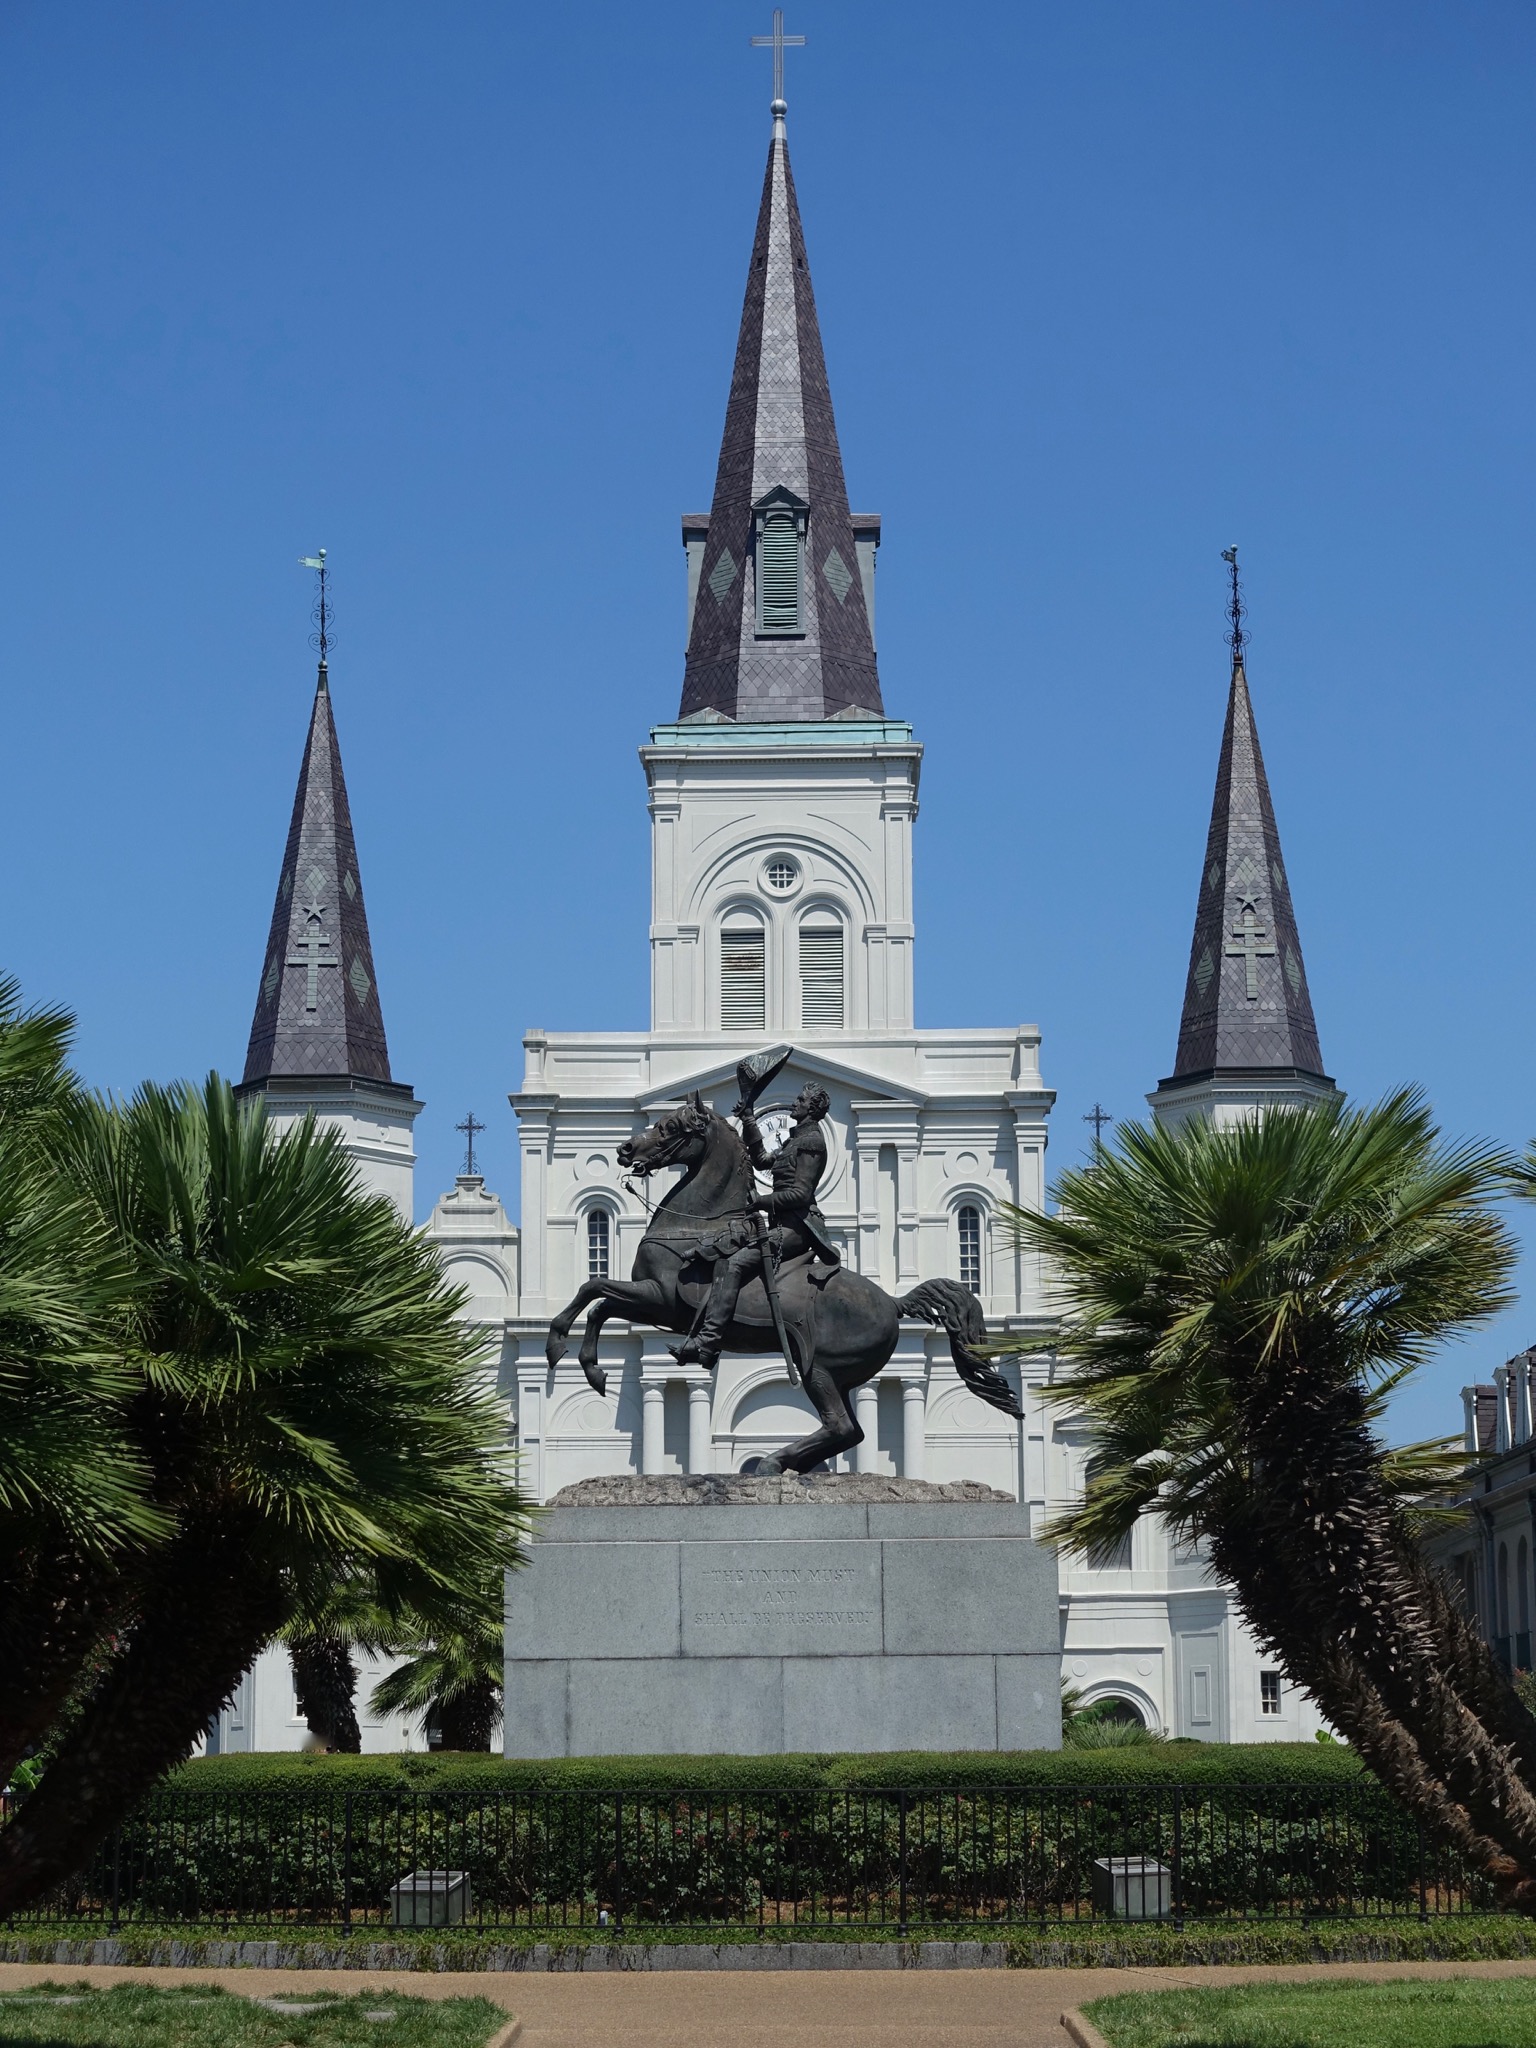 Photo 48 of 56 from the album Highlights New Orleans 2015.